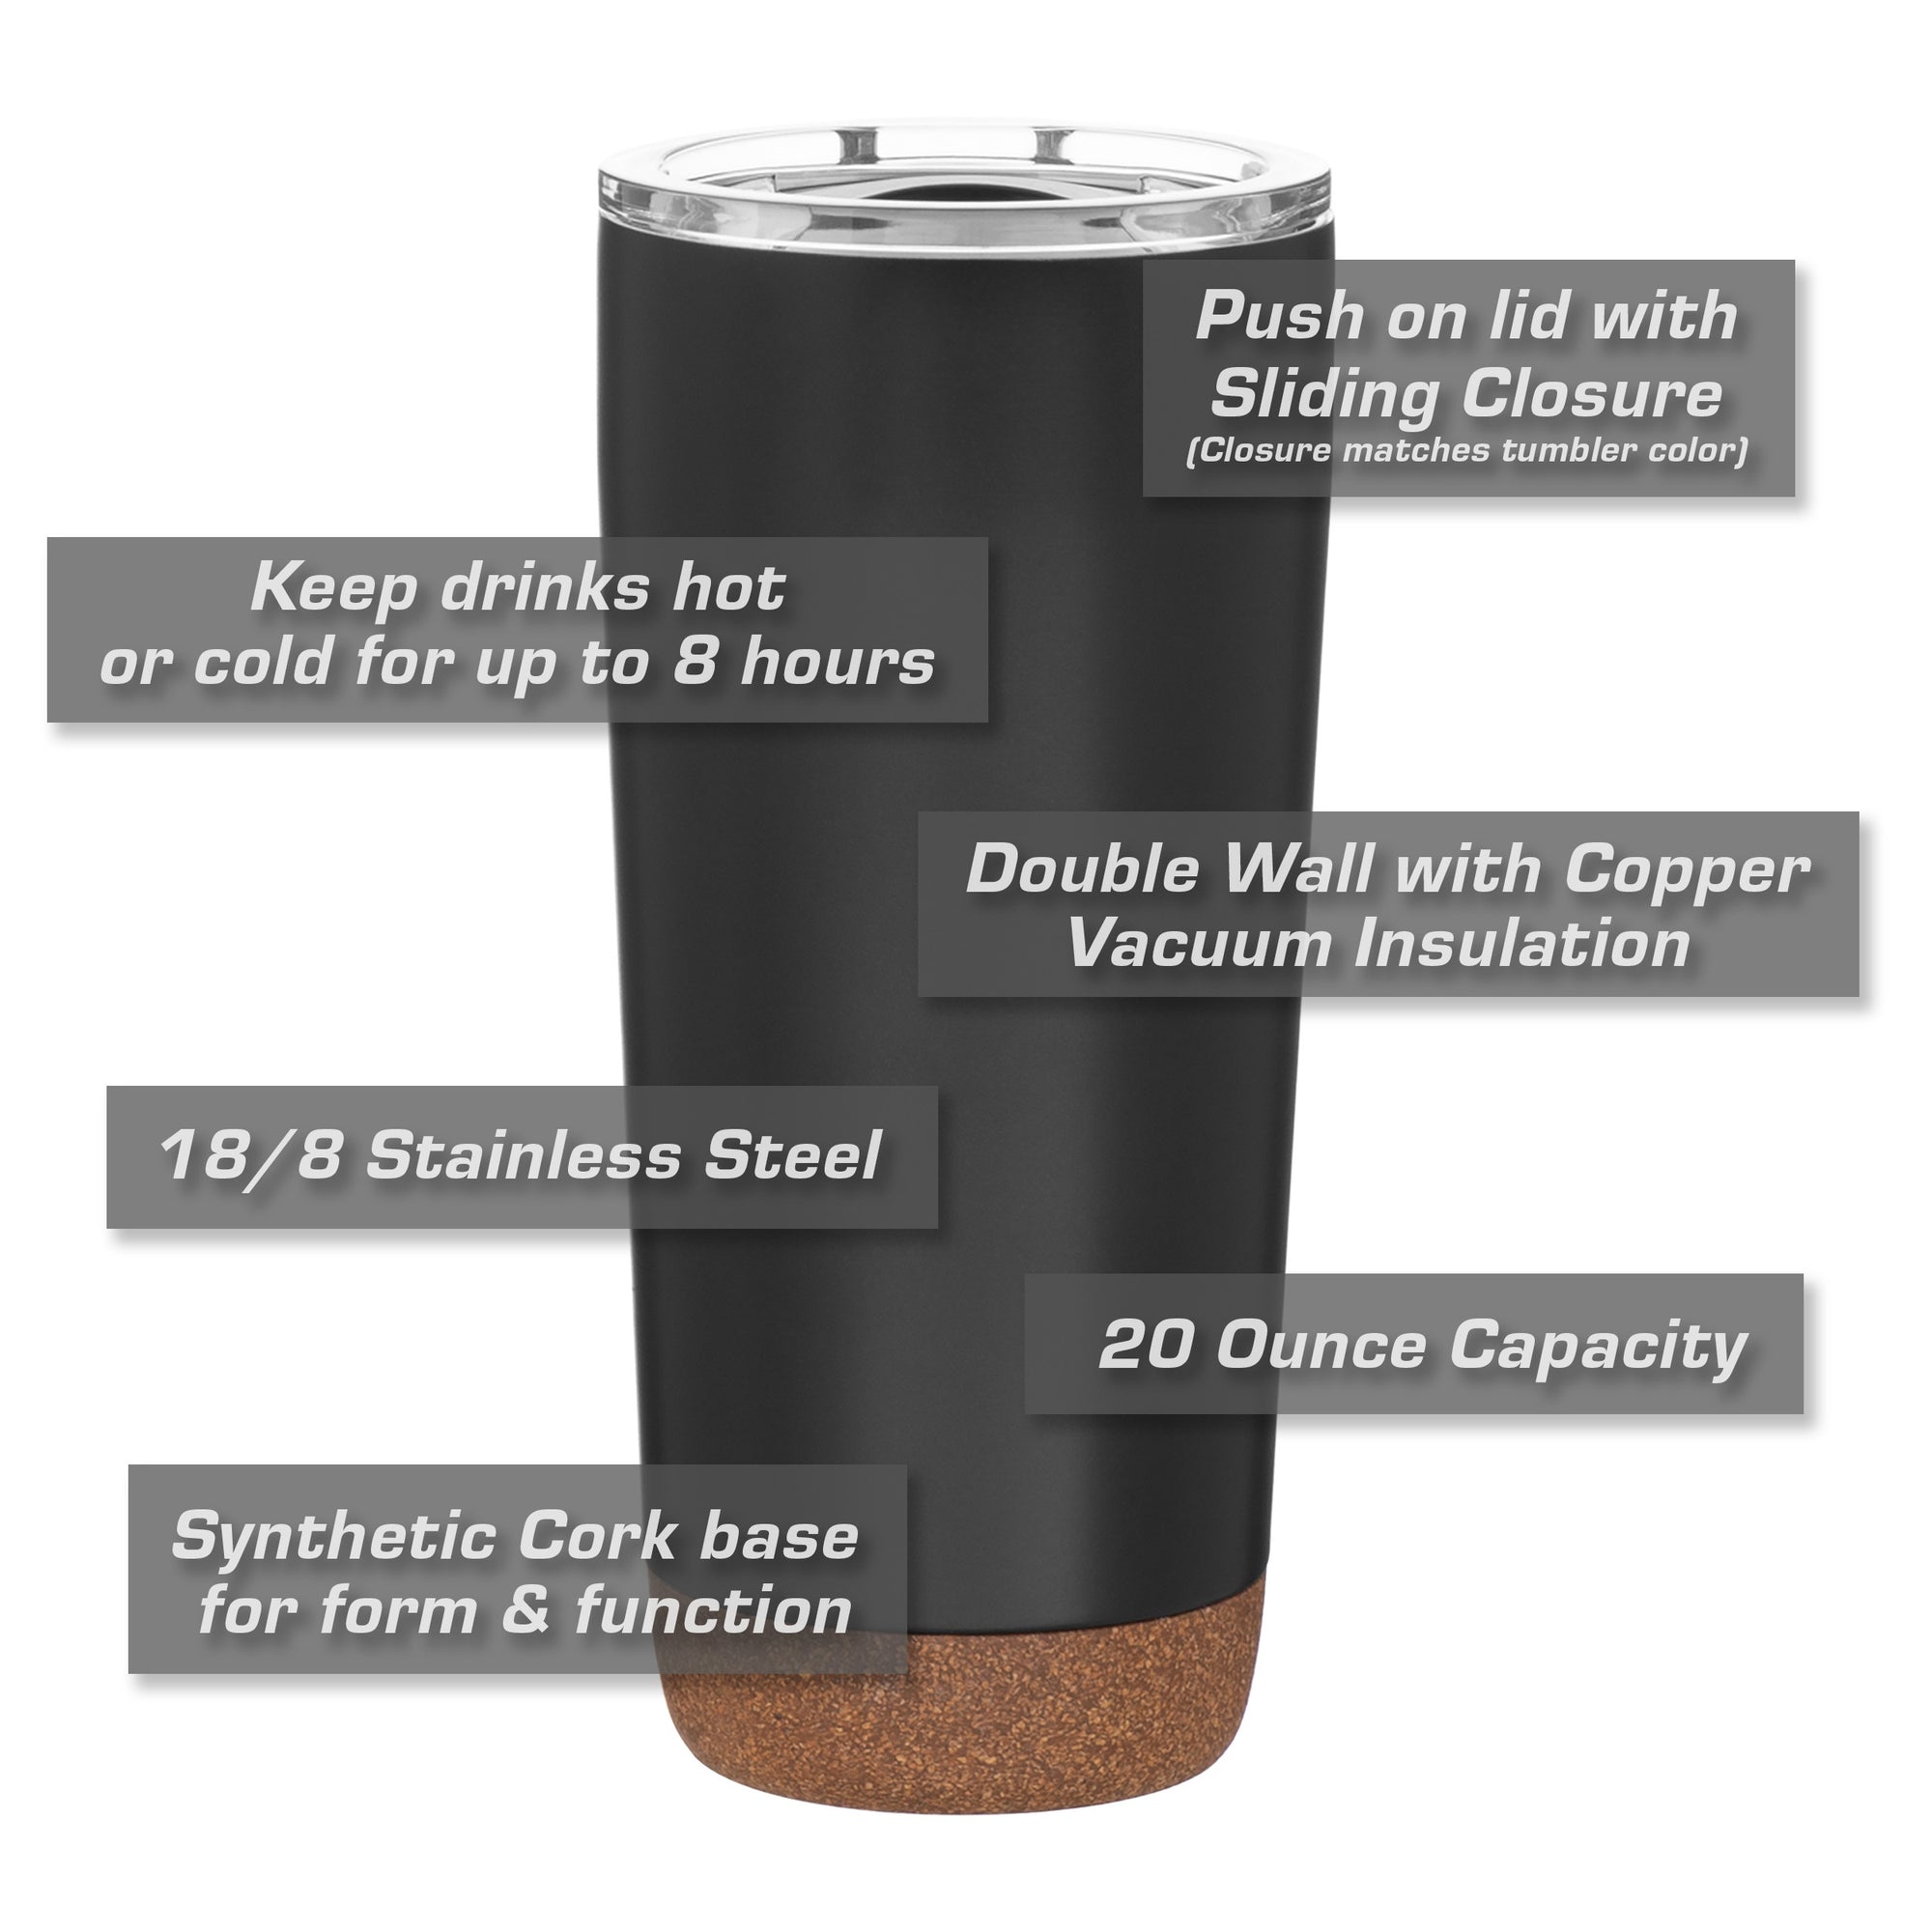 BMW 435i Insulated Stainless Steel Coffee Tumbler - 20 oz - Lugcraft Inc